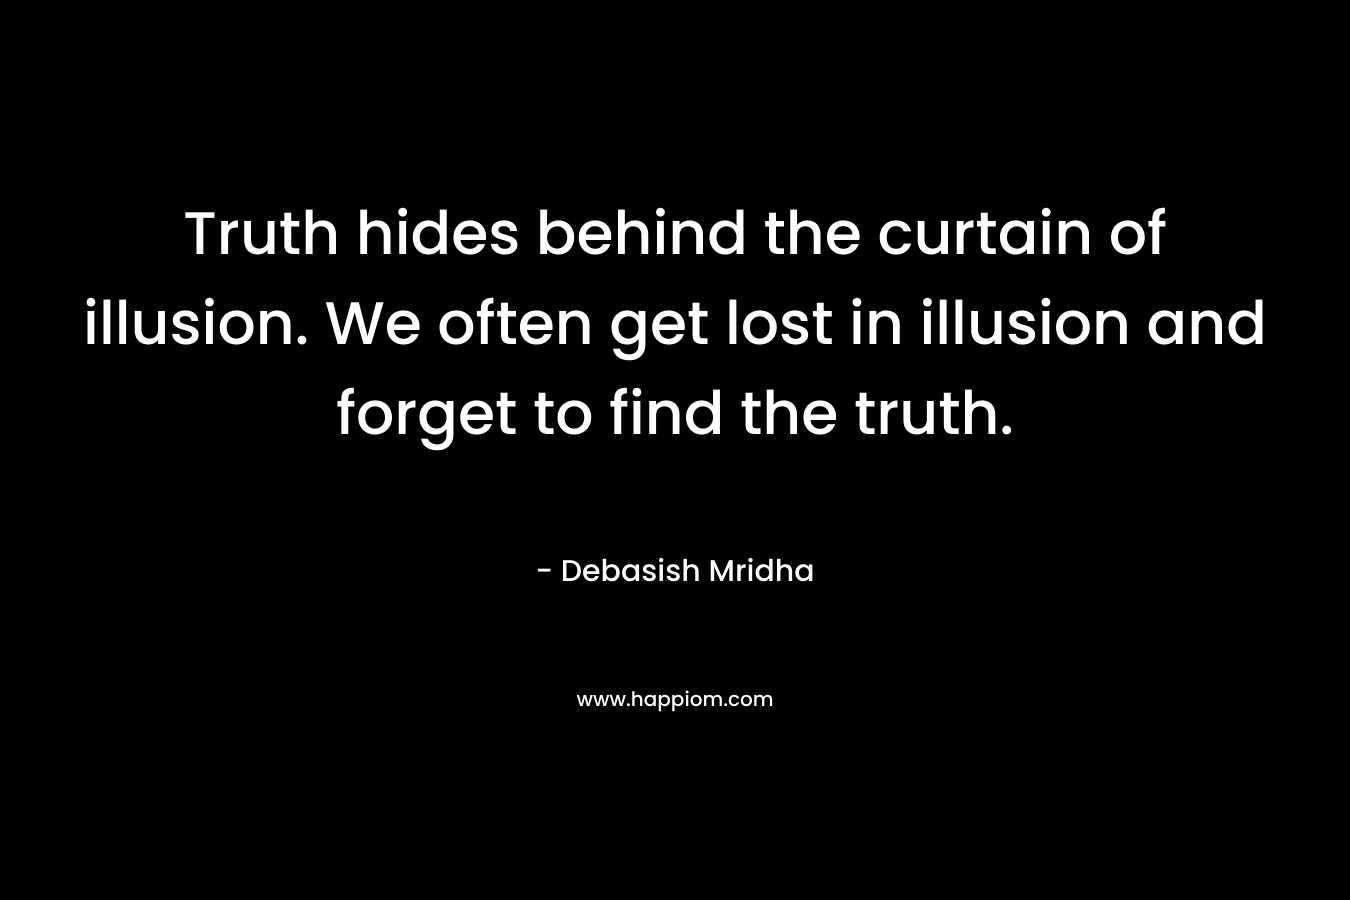 Truth hides behind the curtain of illusion. We often get lost in illusion and forget to find the truth. – Debasish Mridha